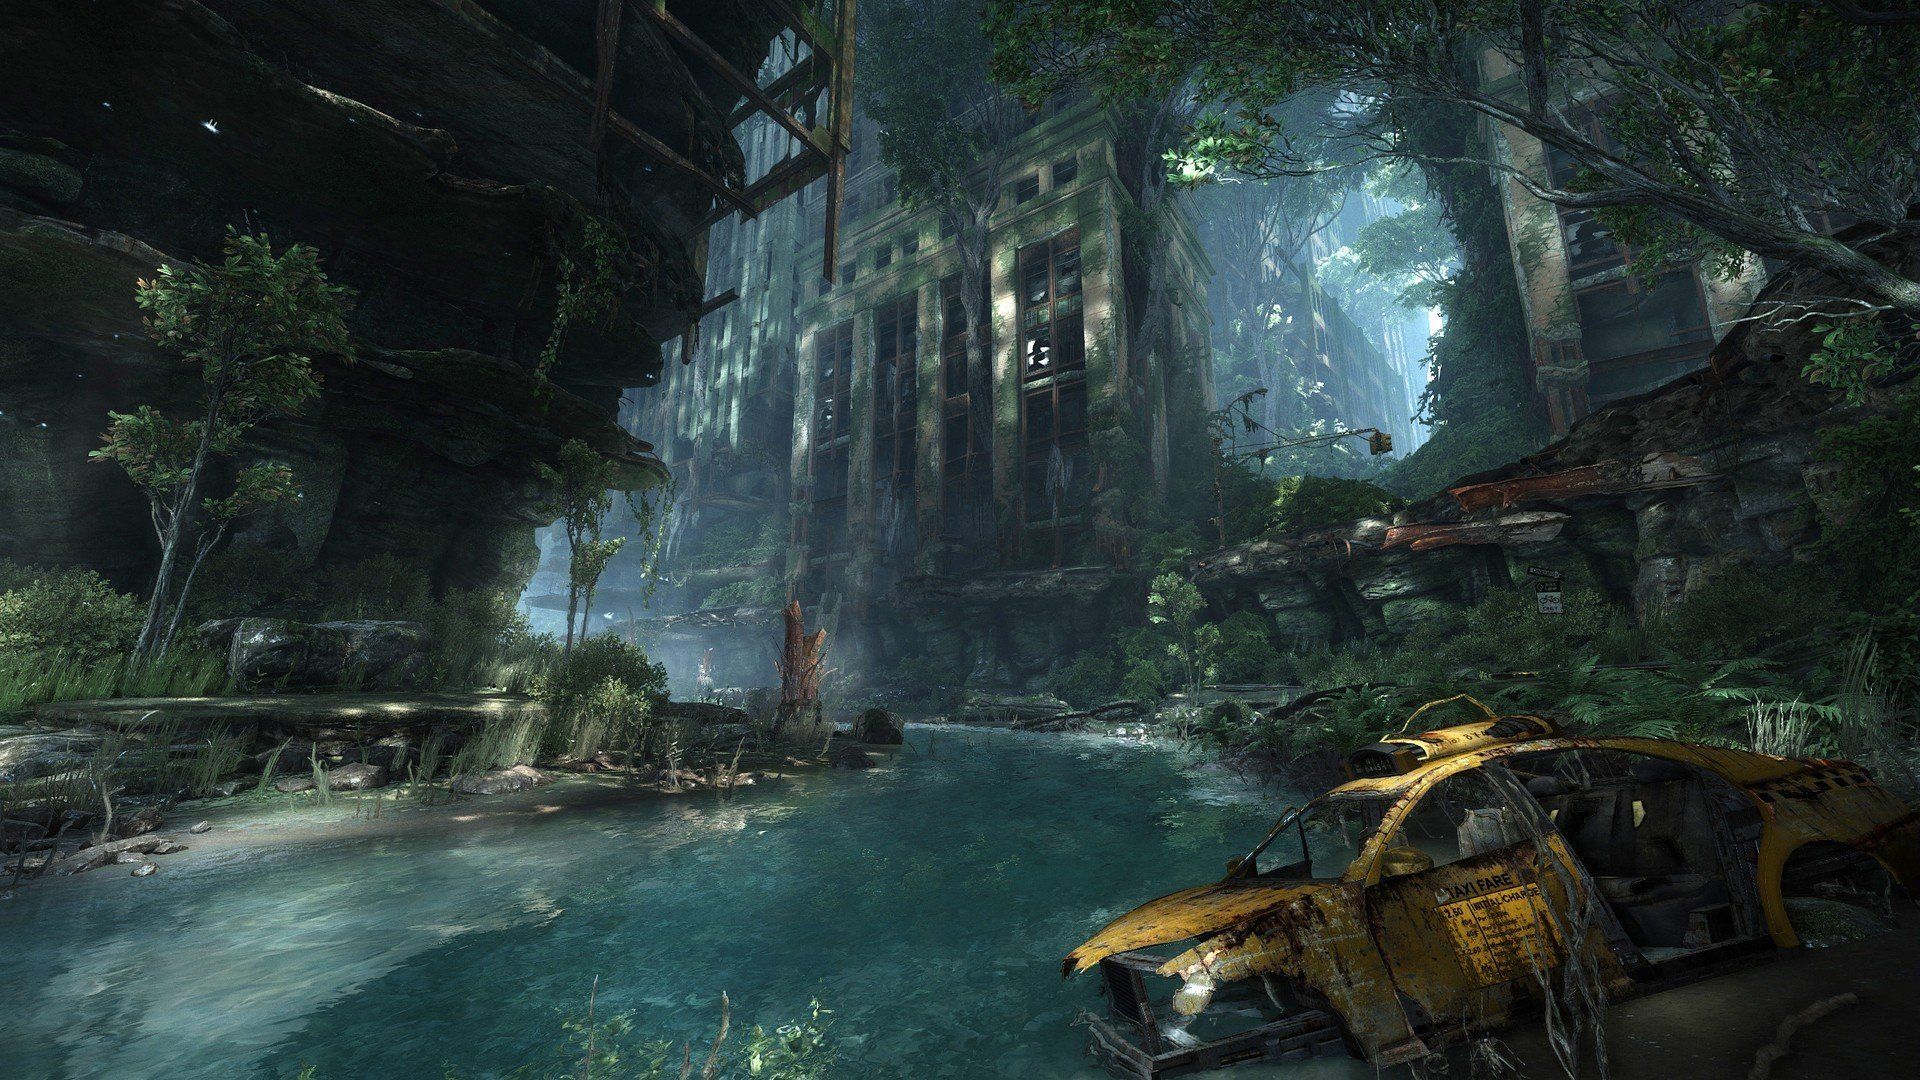 Water video games Crysis destroyed abandoned city abandoned Crysis